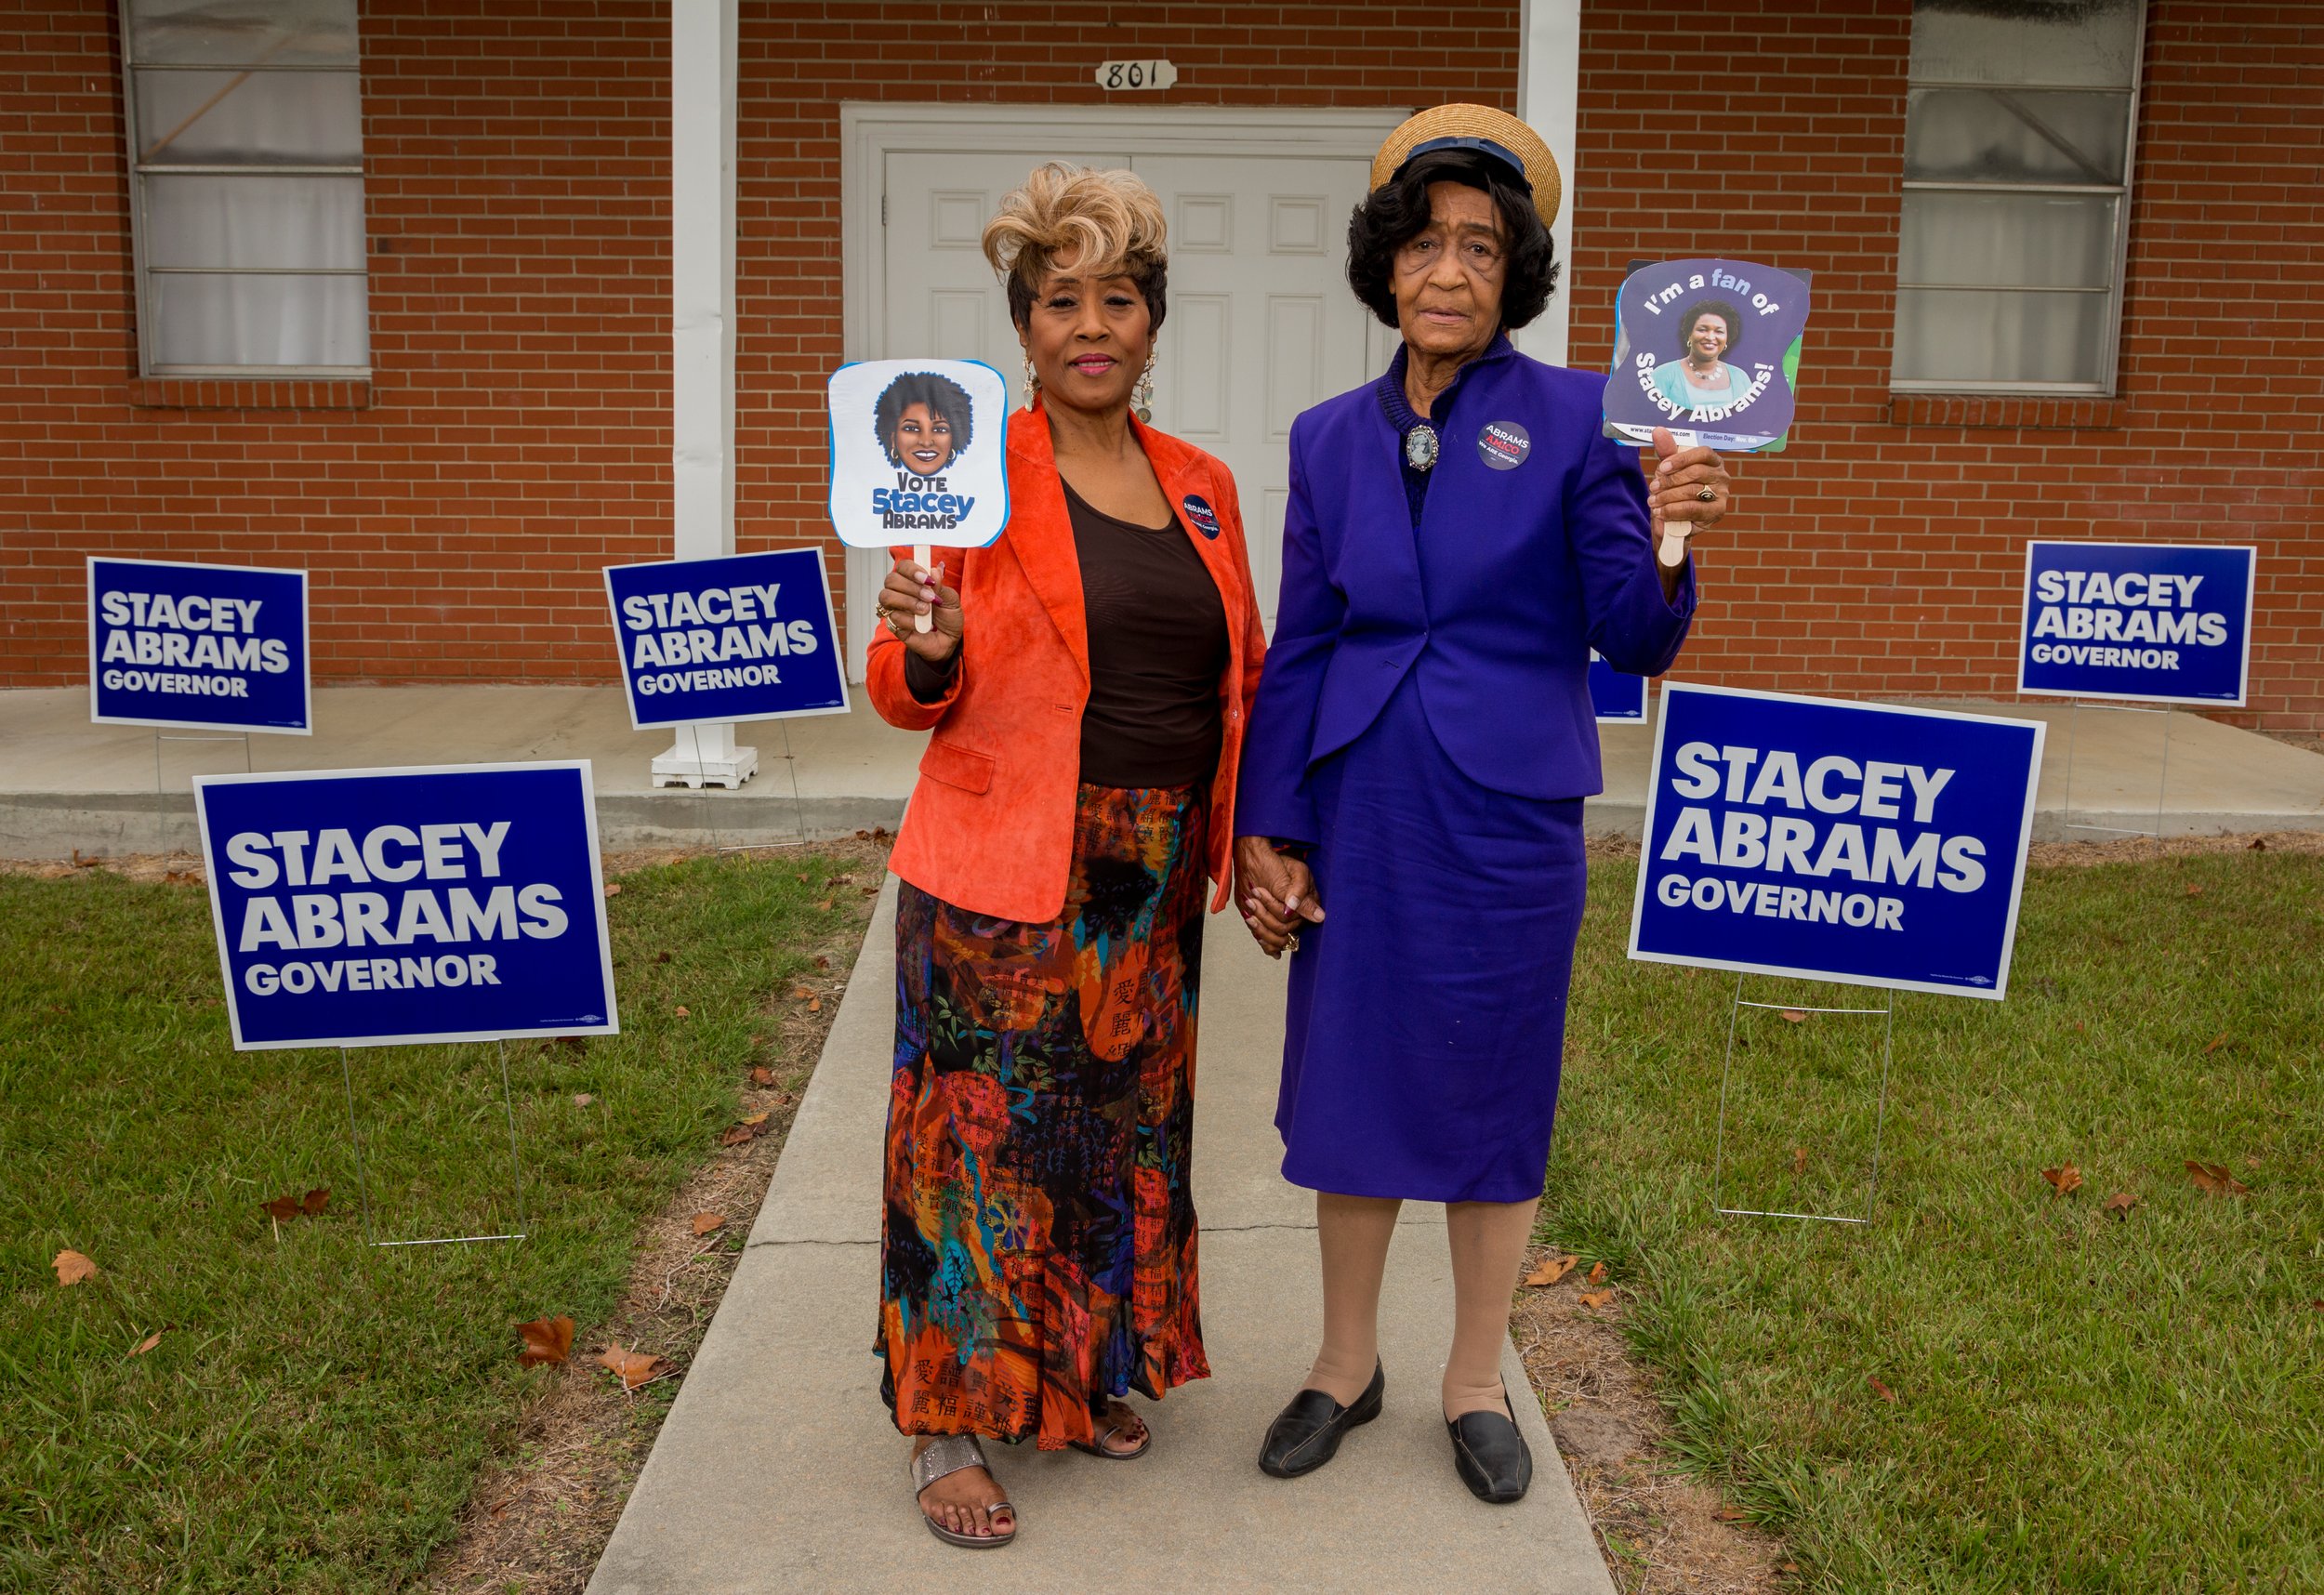 Campaigning for Stacey Abrams